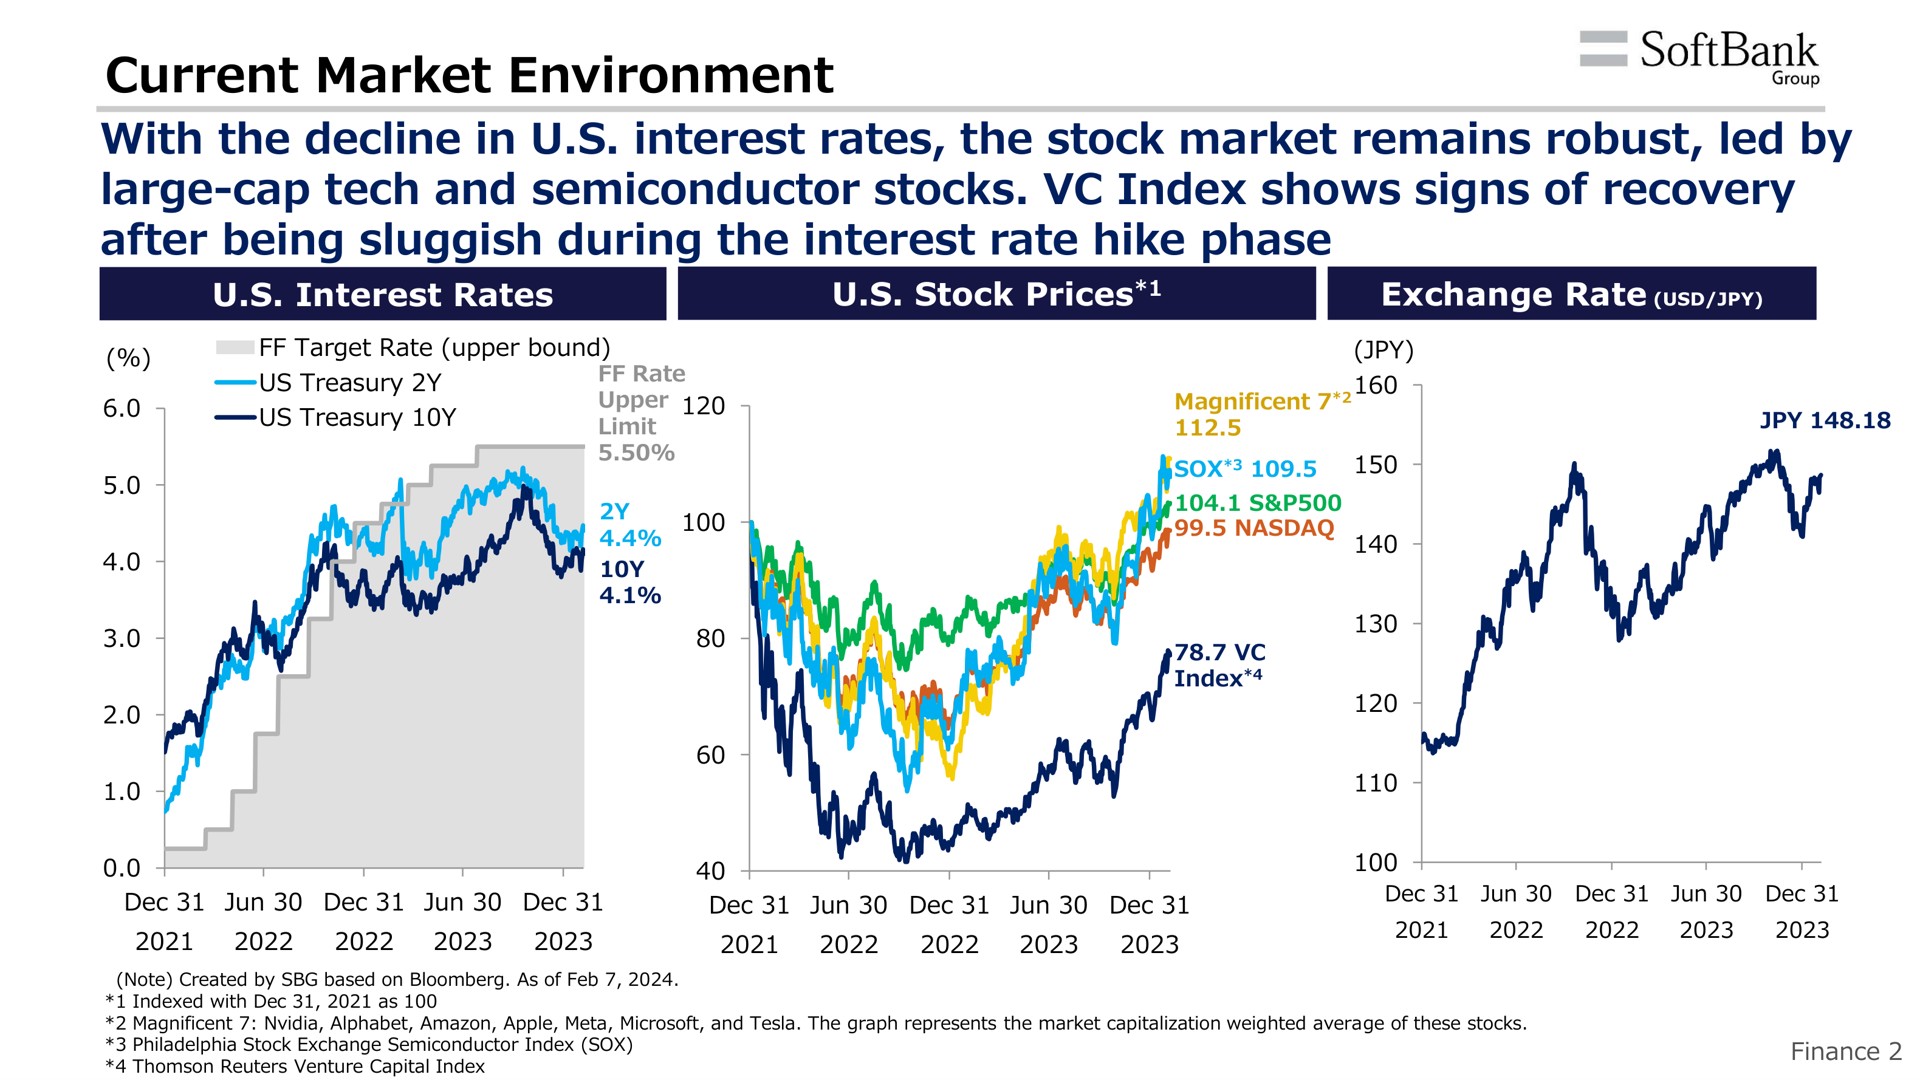 current market environment with the decline in interest rates the stock market remains robust led by large cap tech and semiconductor stocks index shows signs of recovery after being sluggish during the interest rate hike phase | SoftBank